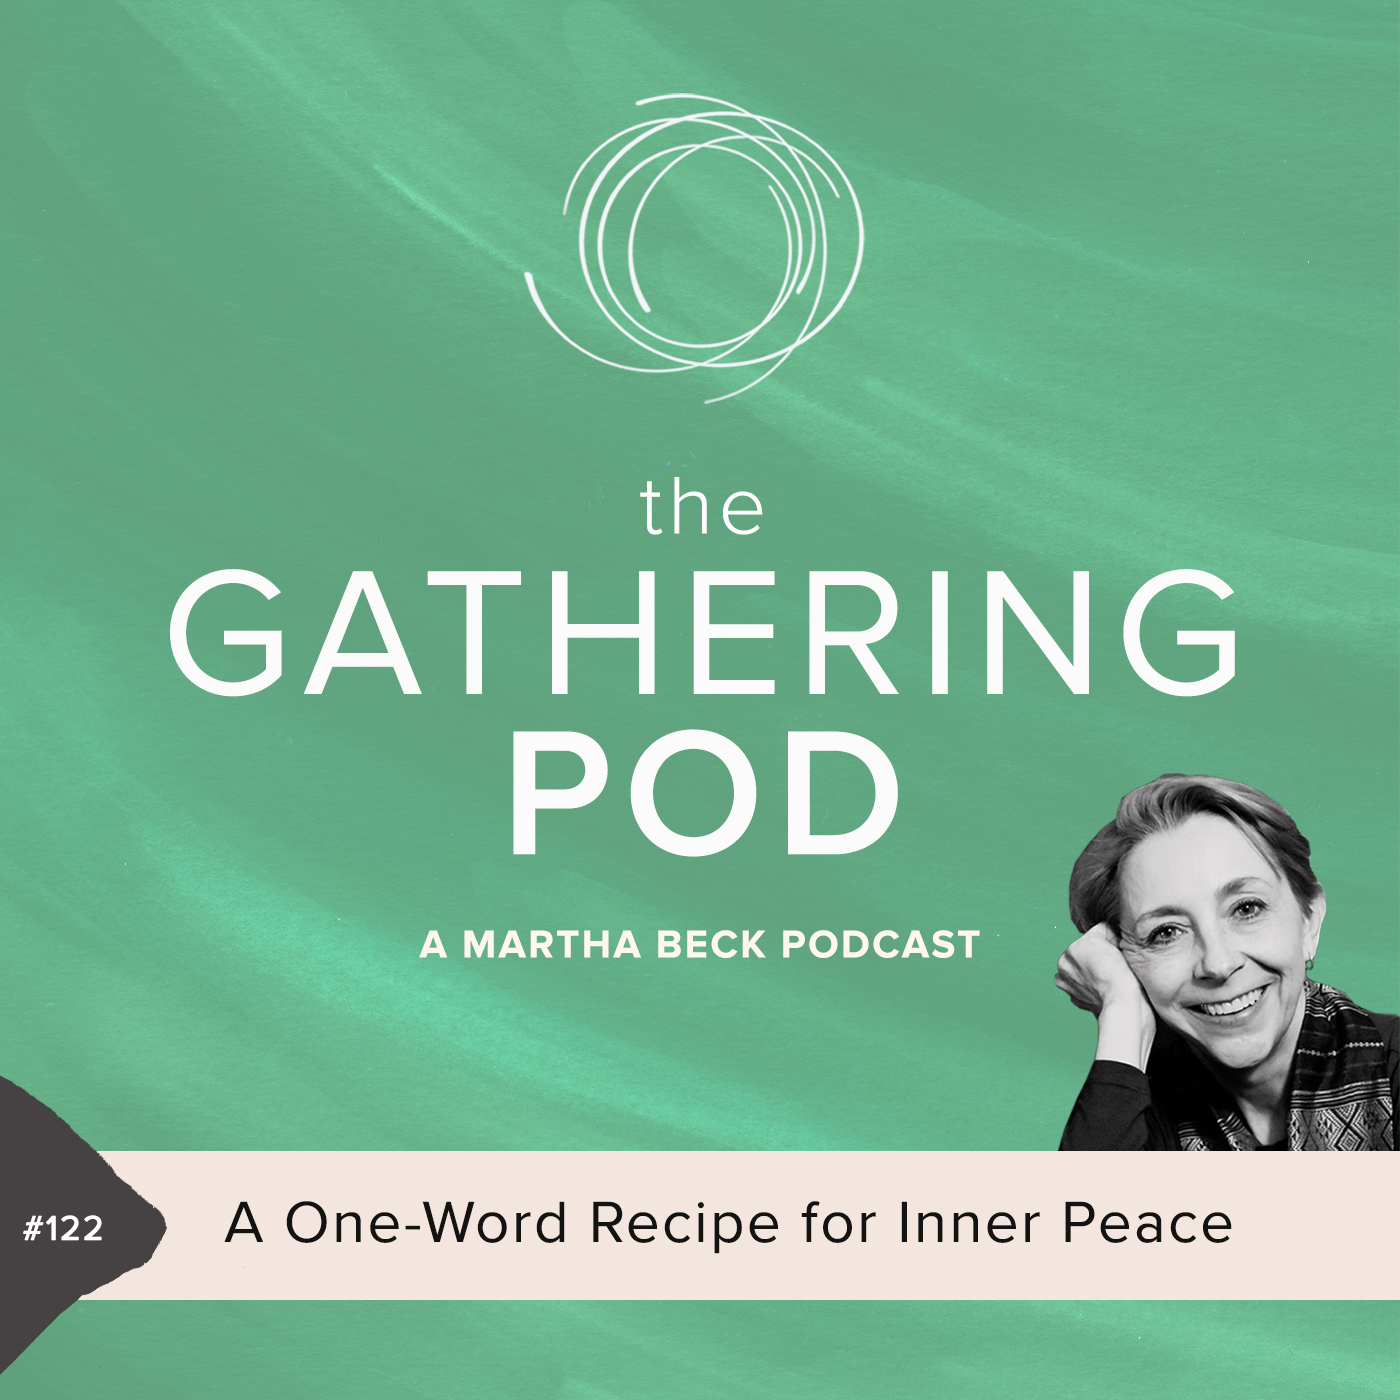 Image for The Gathering Pod A Martha Beck Podcast Episode #122 A One-Word Recipe for Inner Peace